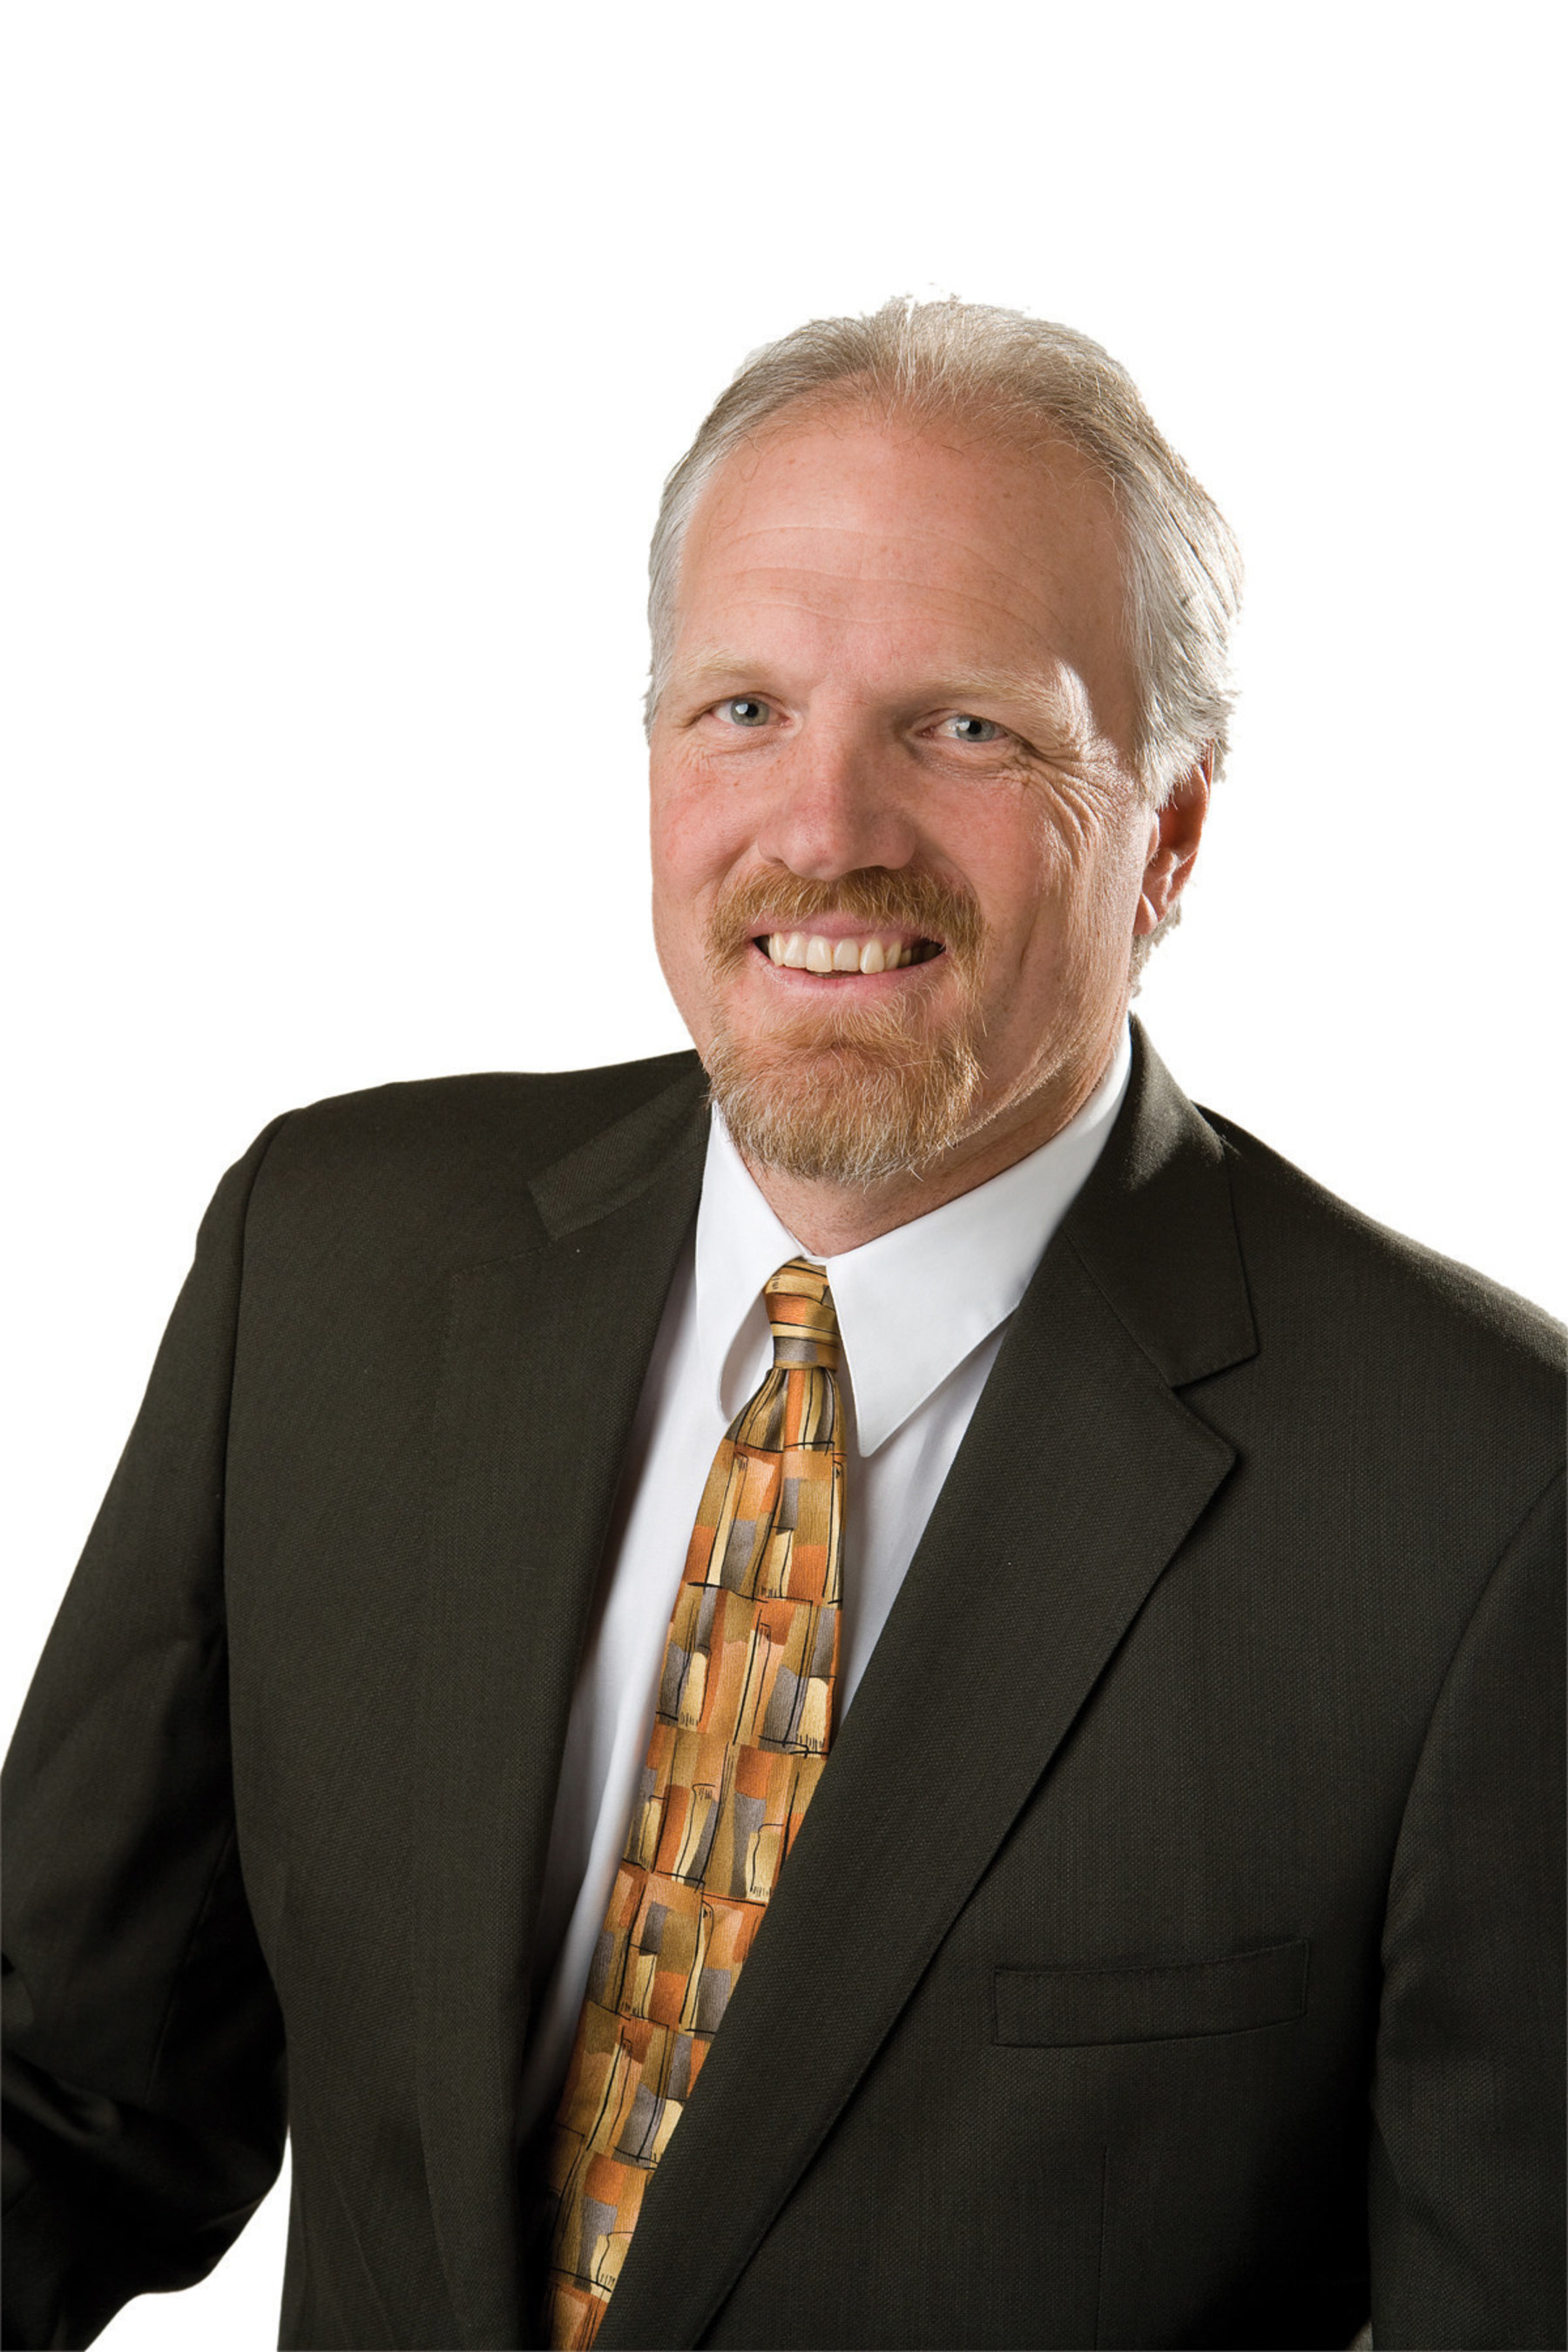 Toastmaster and former NBA player, Mark Eaton